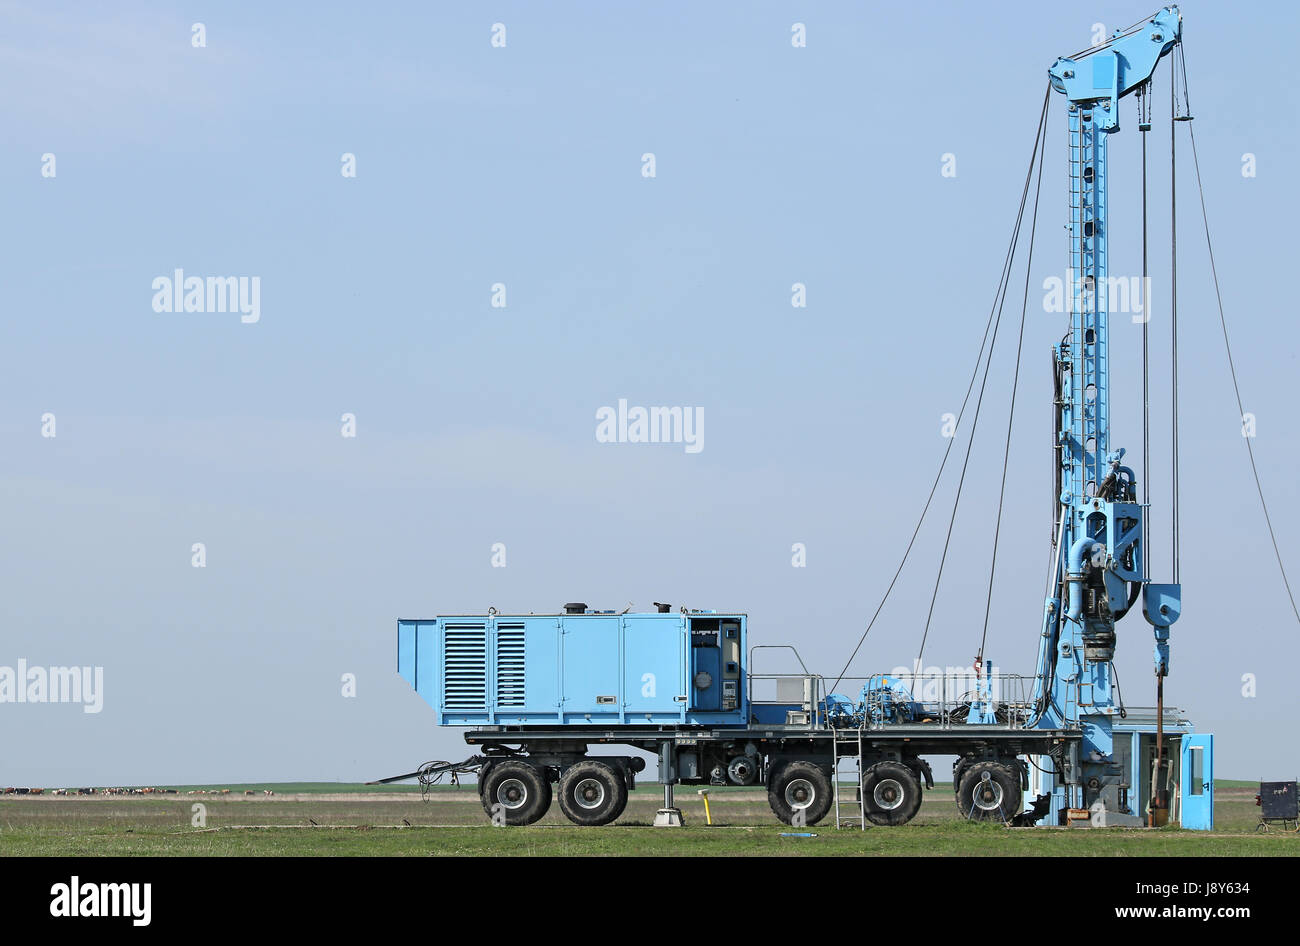 geology and oil exploration mobile drilling rig vehicle on field Stock Photo